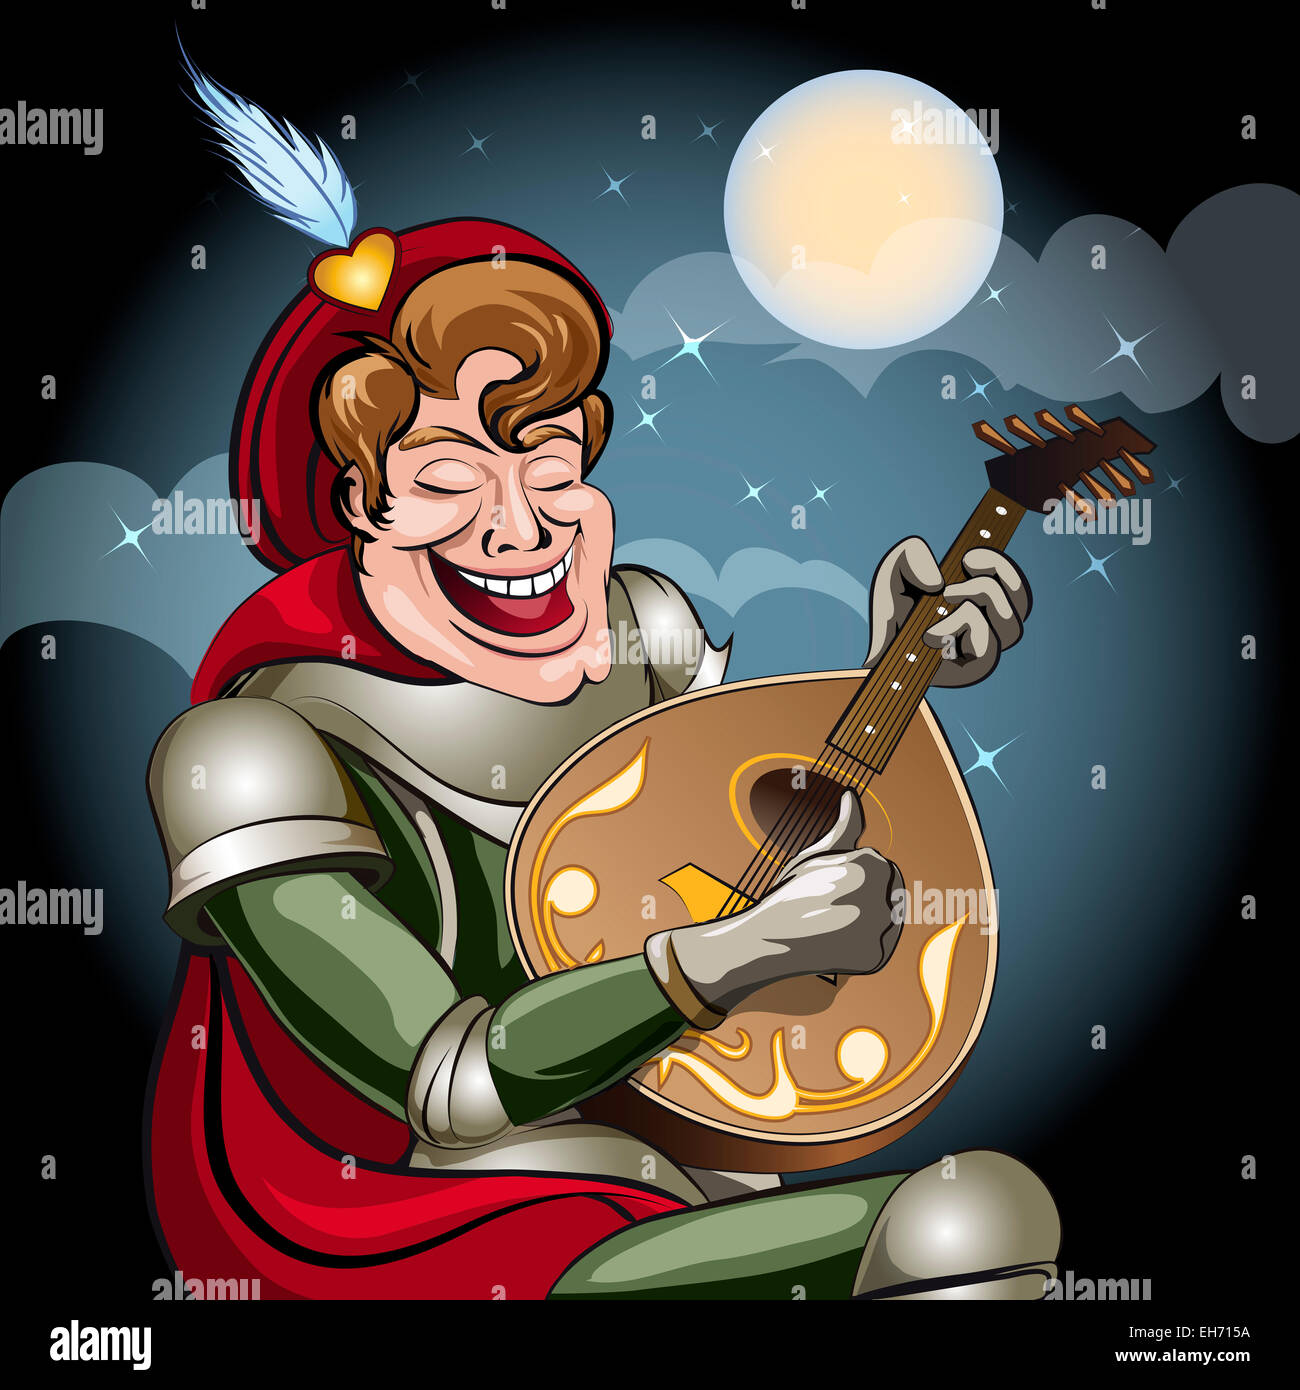 Illustration with minstrel in armor and red coat play on lute and sing serenade to his damsel drawn in cartoon style Stock Photo